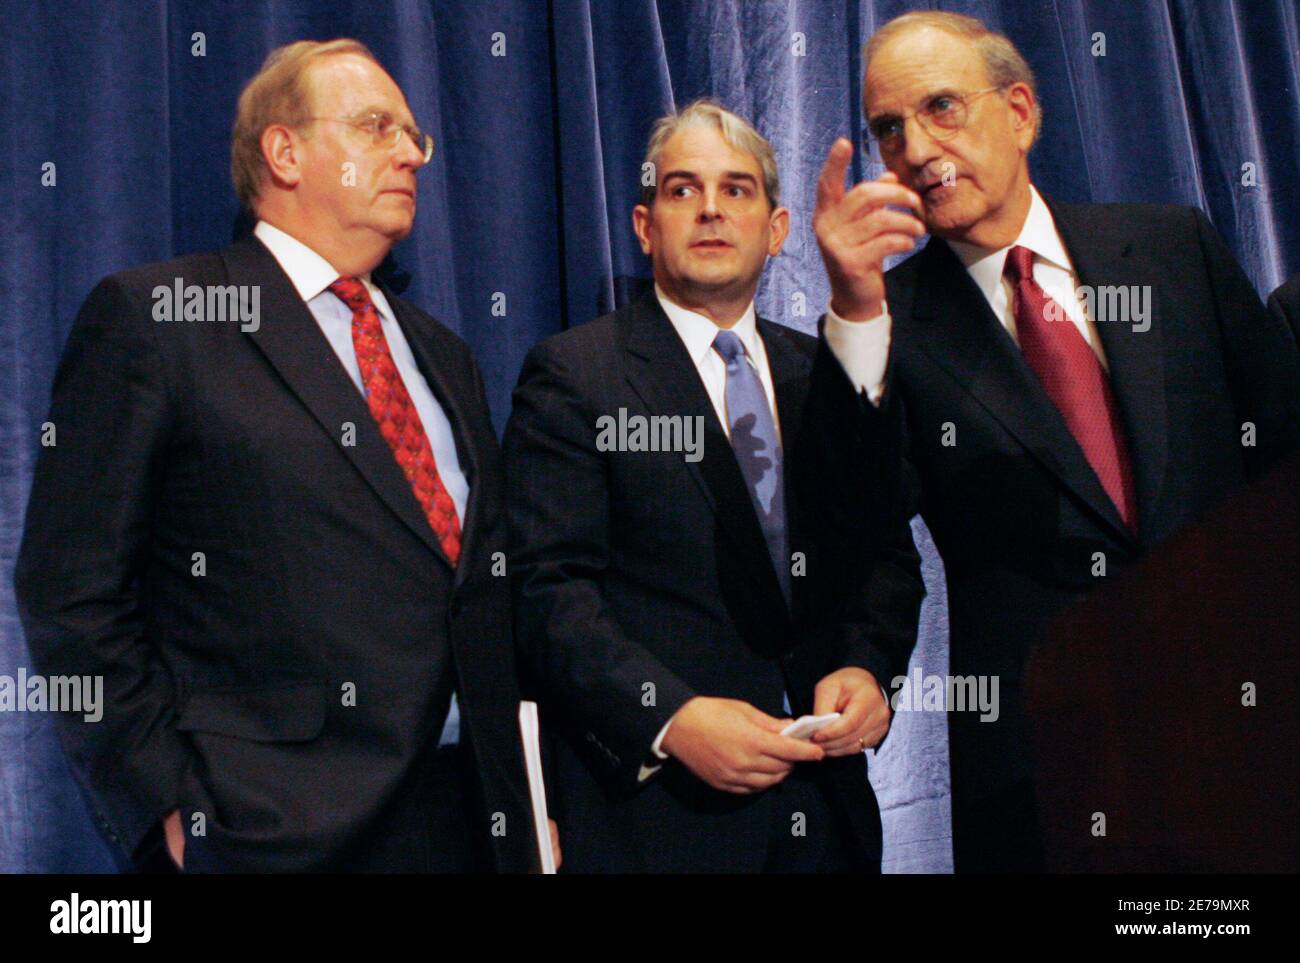 Former U.S. Sen. George Mitchell (R) confers with members of his investigative team, Richard McClaren (L) and John Clarke (C), at a news conference where Mitchell unveiled the long-awaited Mitchell Report on steroids use, in New York December 13, 2007. Dozens of top baseball stars including Roger Clemens were named on Thursday in the report on steroids use, which Major League Baseball hopes will help clean up the sport's tarnished. REUTERS/MIke Segar   (UNITED STATES) Stock Photo